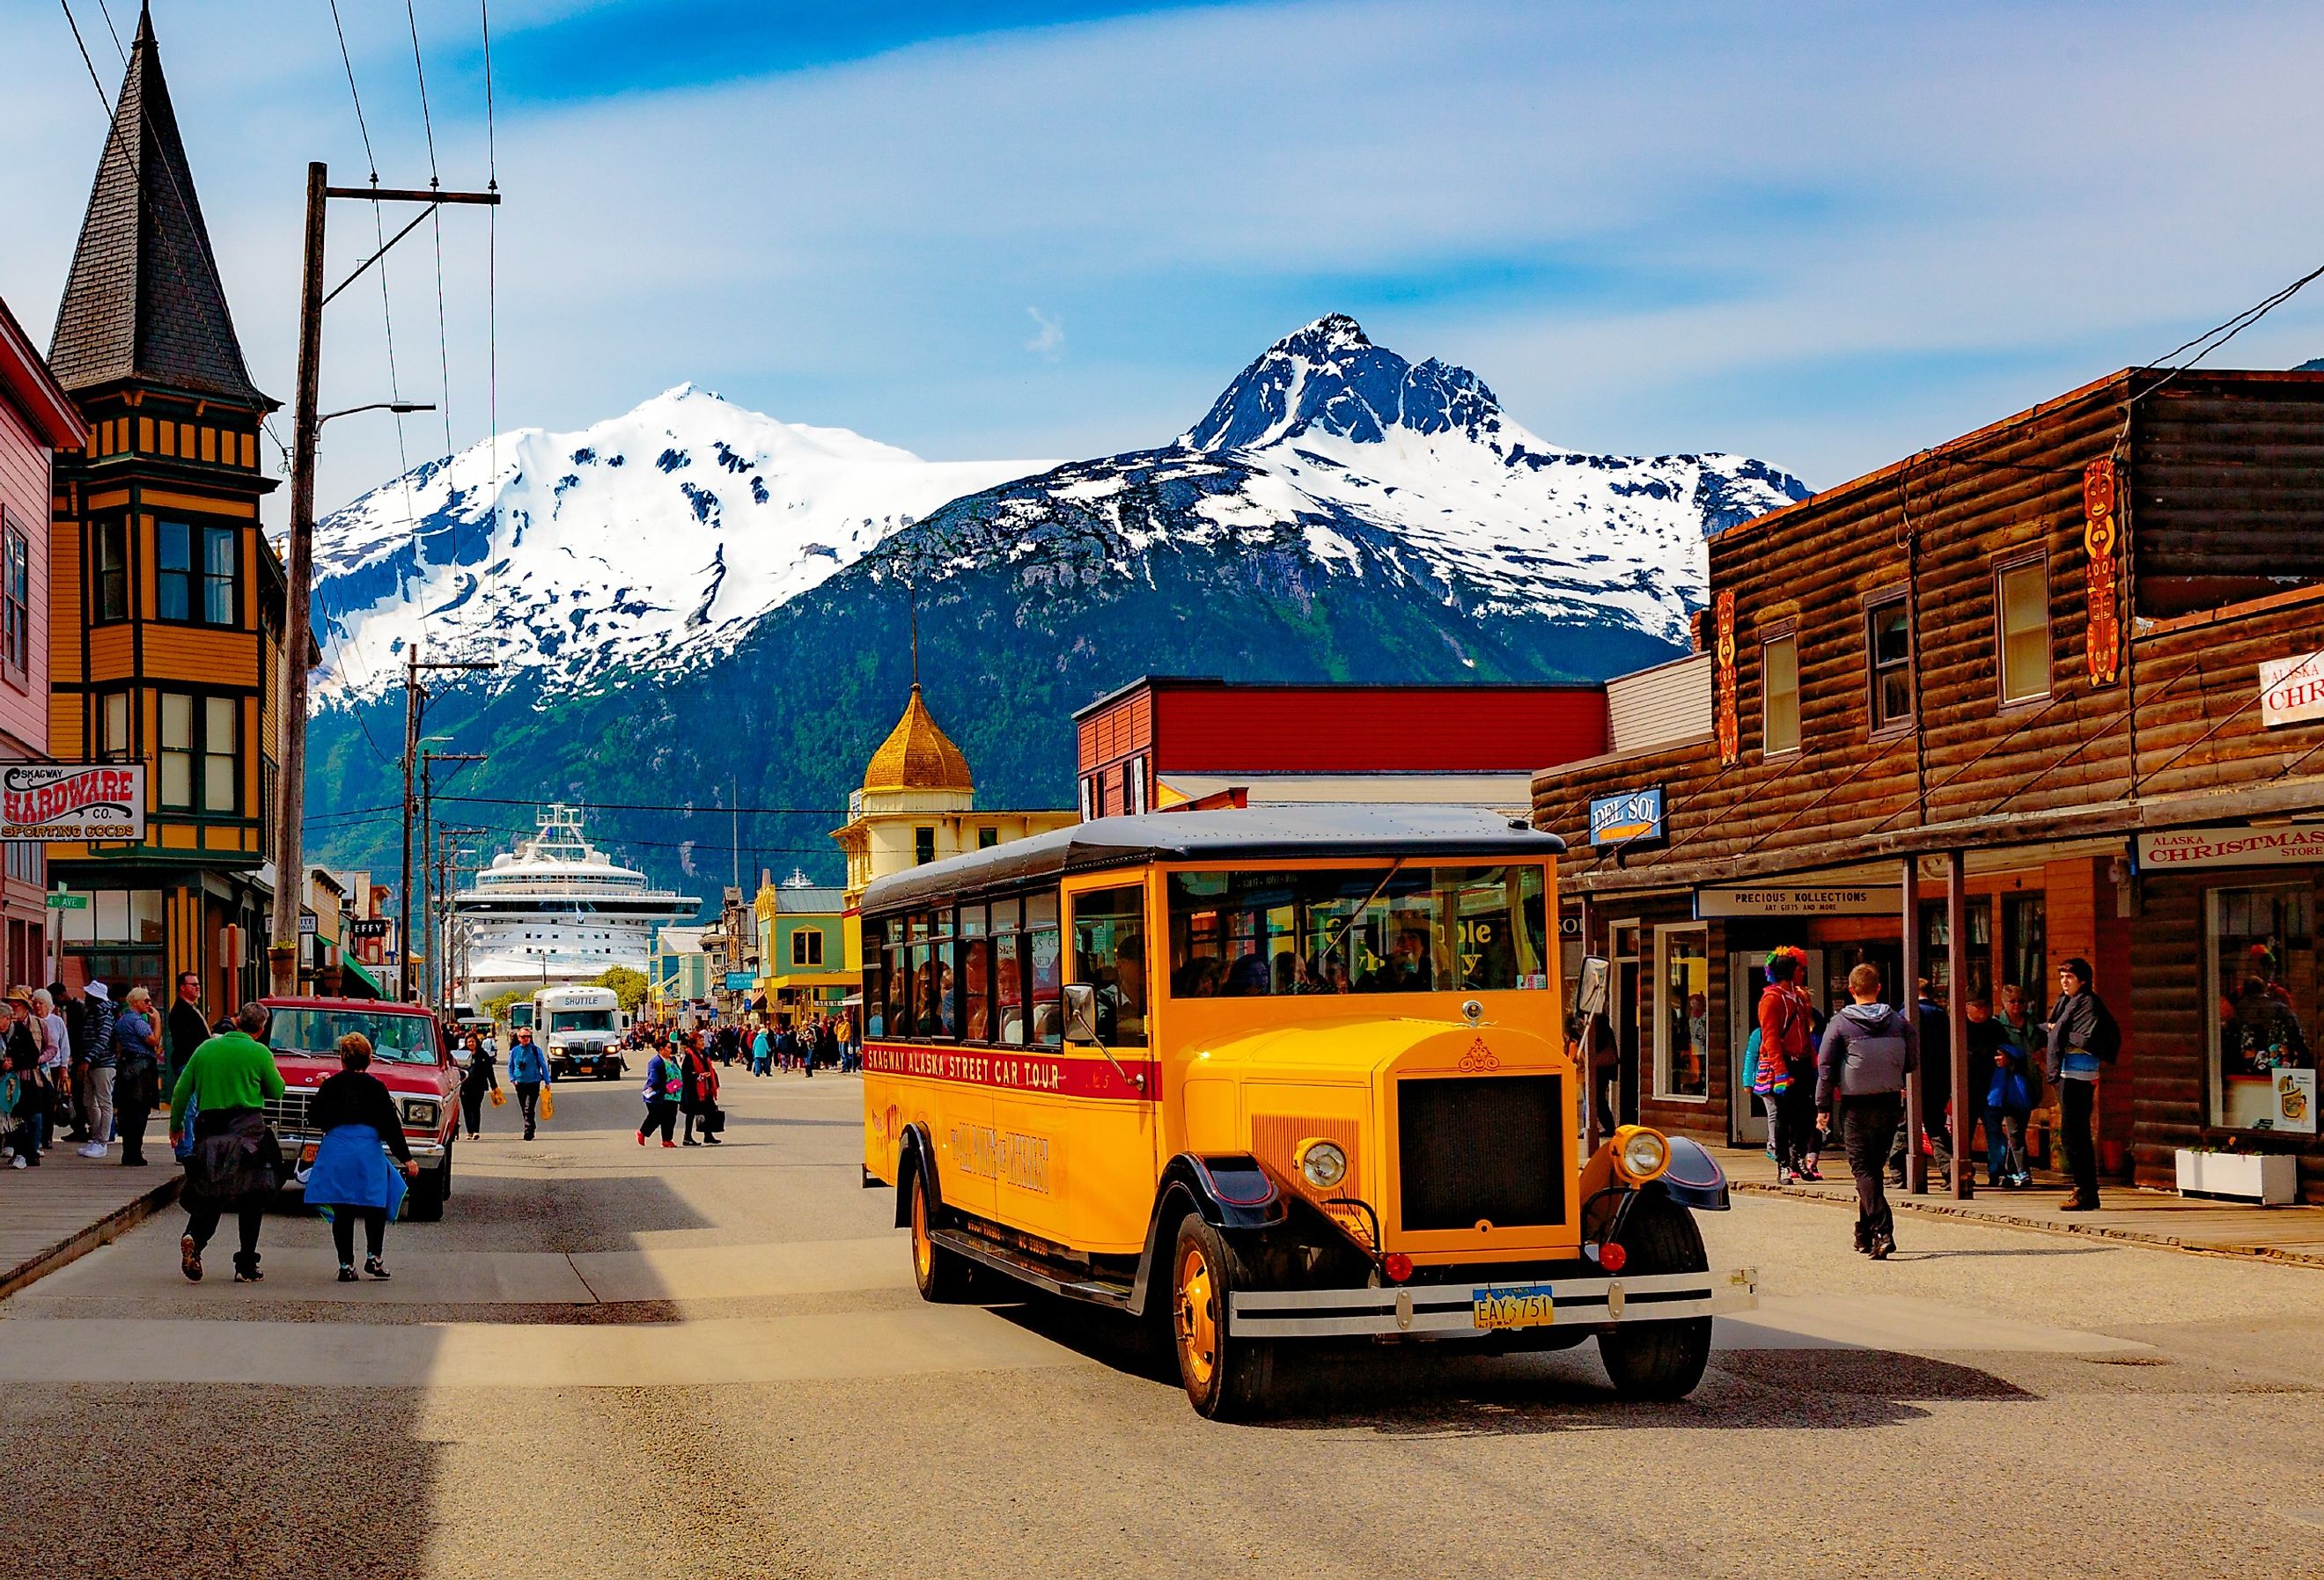  Downtown Skagway bustles with cruise passengers enjoying the natural beauty and the transportation options. Image credit Daniel Shumny via Shutterstock